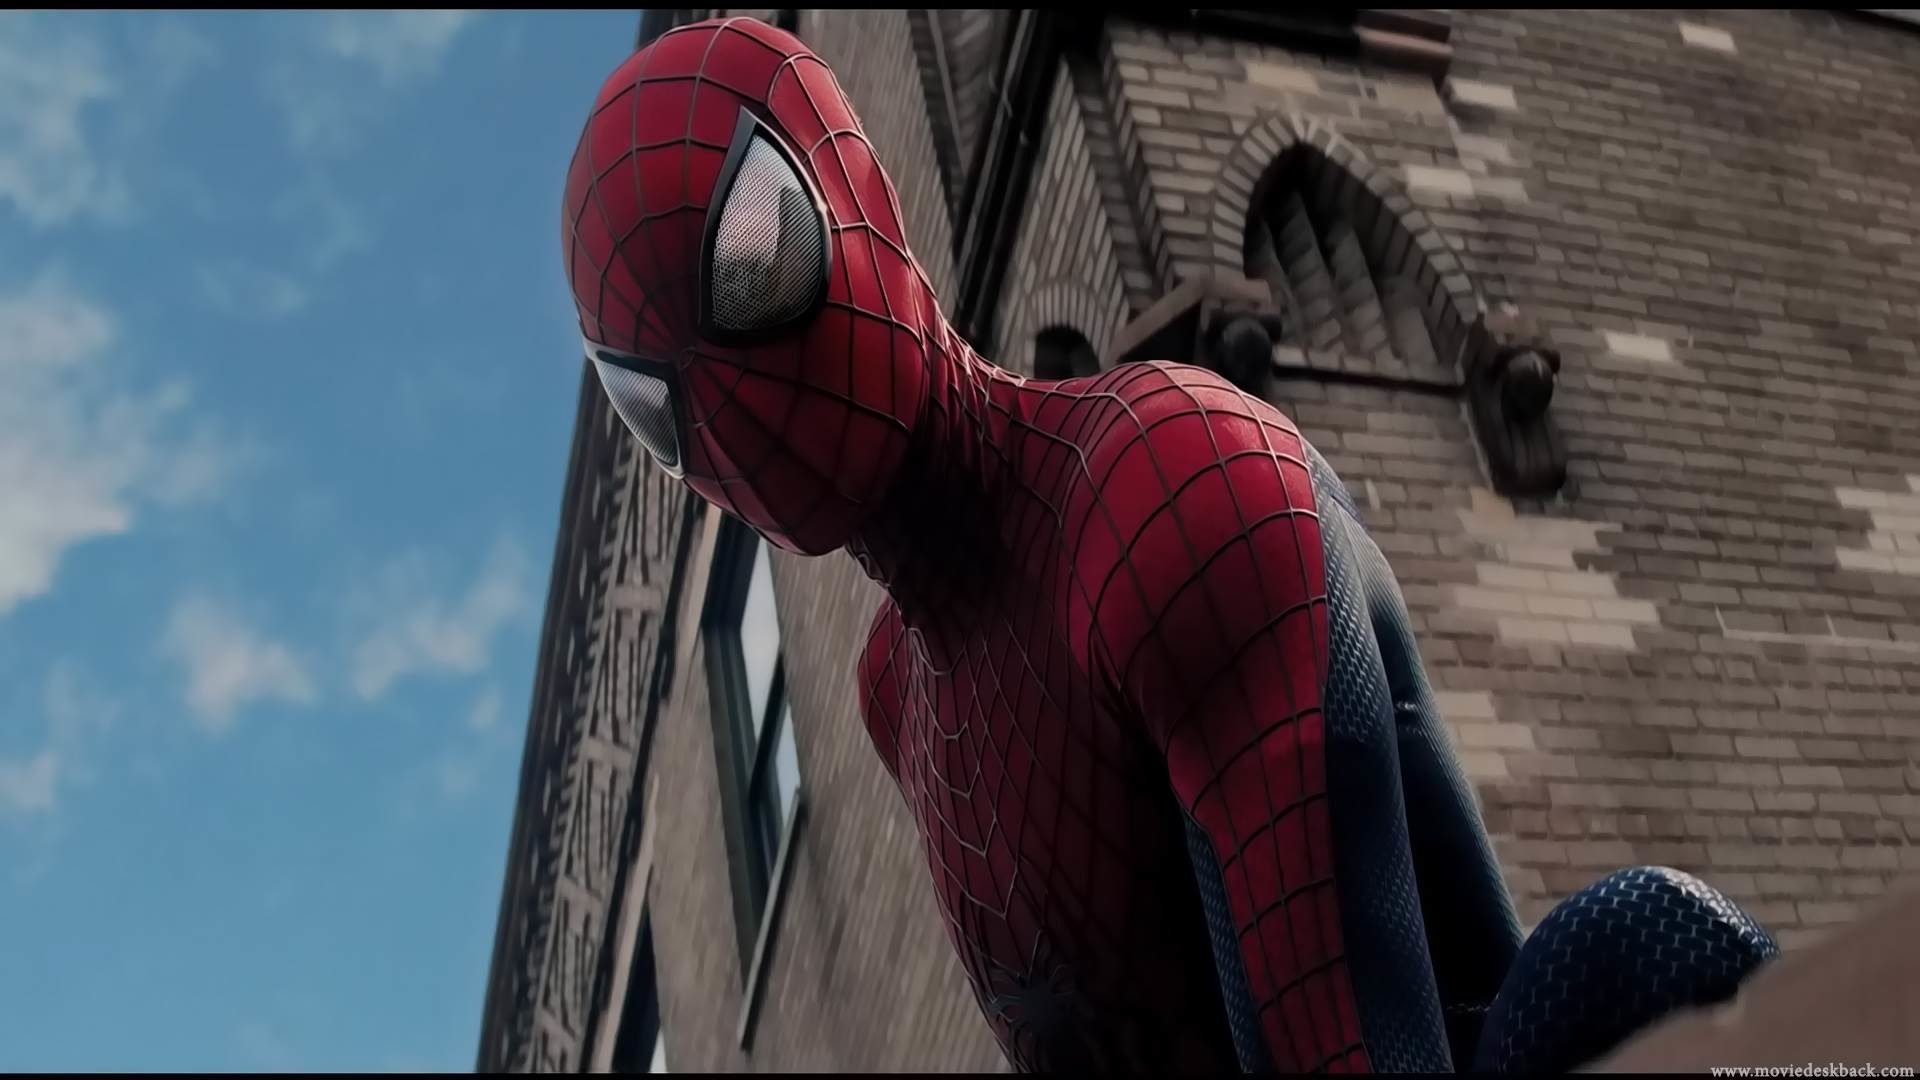 1920x1080 undefined The Amazing Spiderman 2 Wallpapers | Adorable Wallpapers